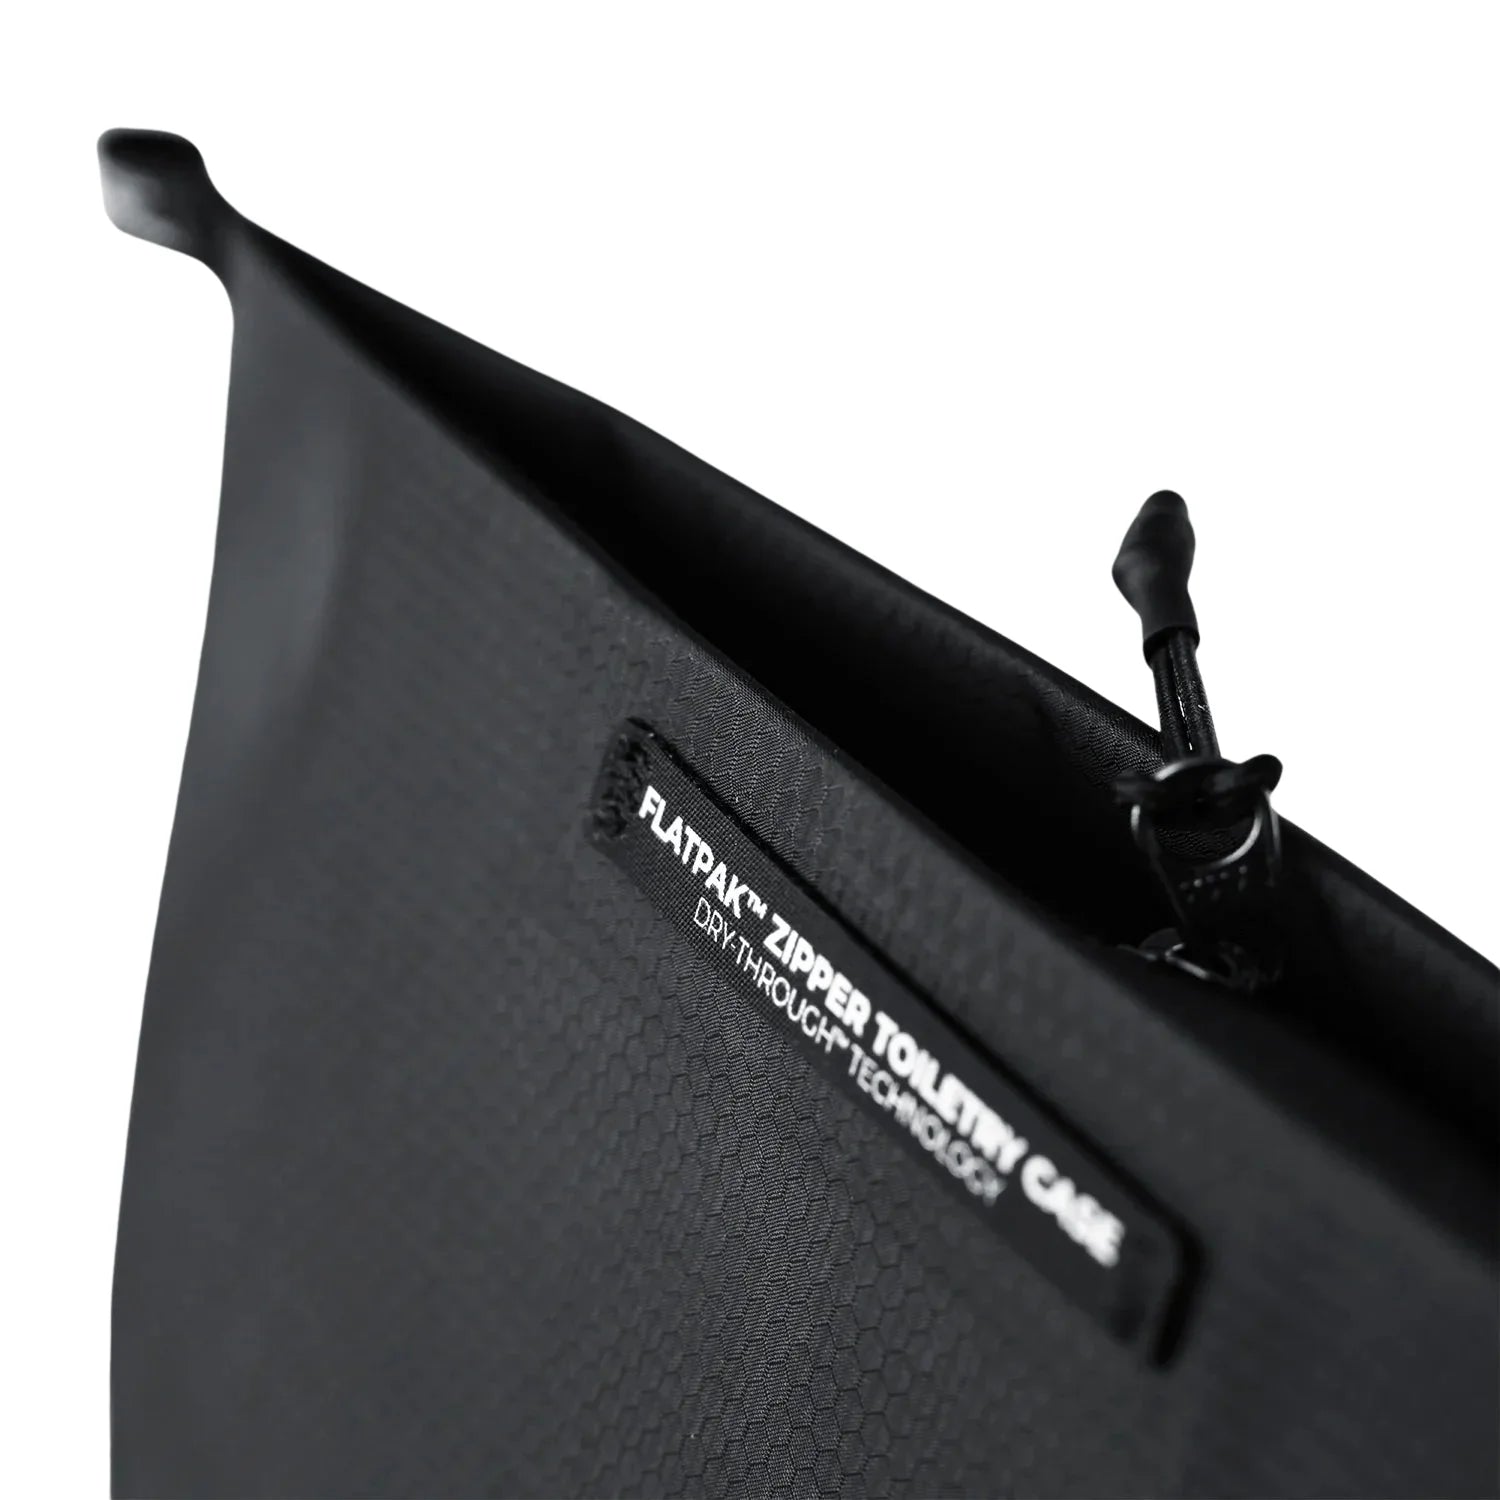 Matador's zippered toiletry case showing the zipper pull and detail.